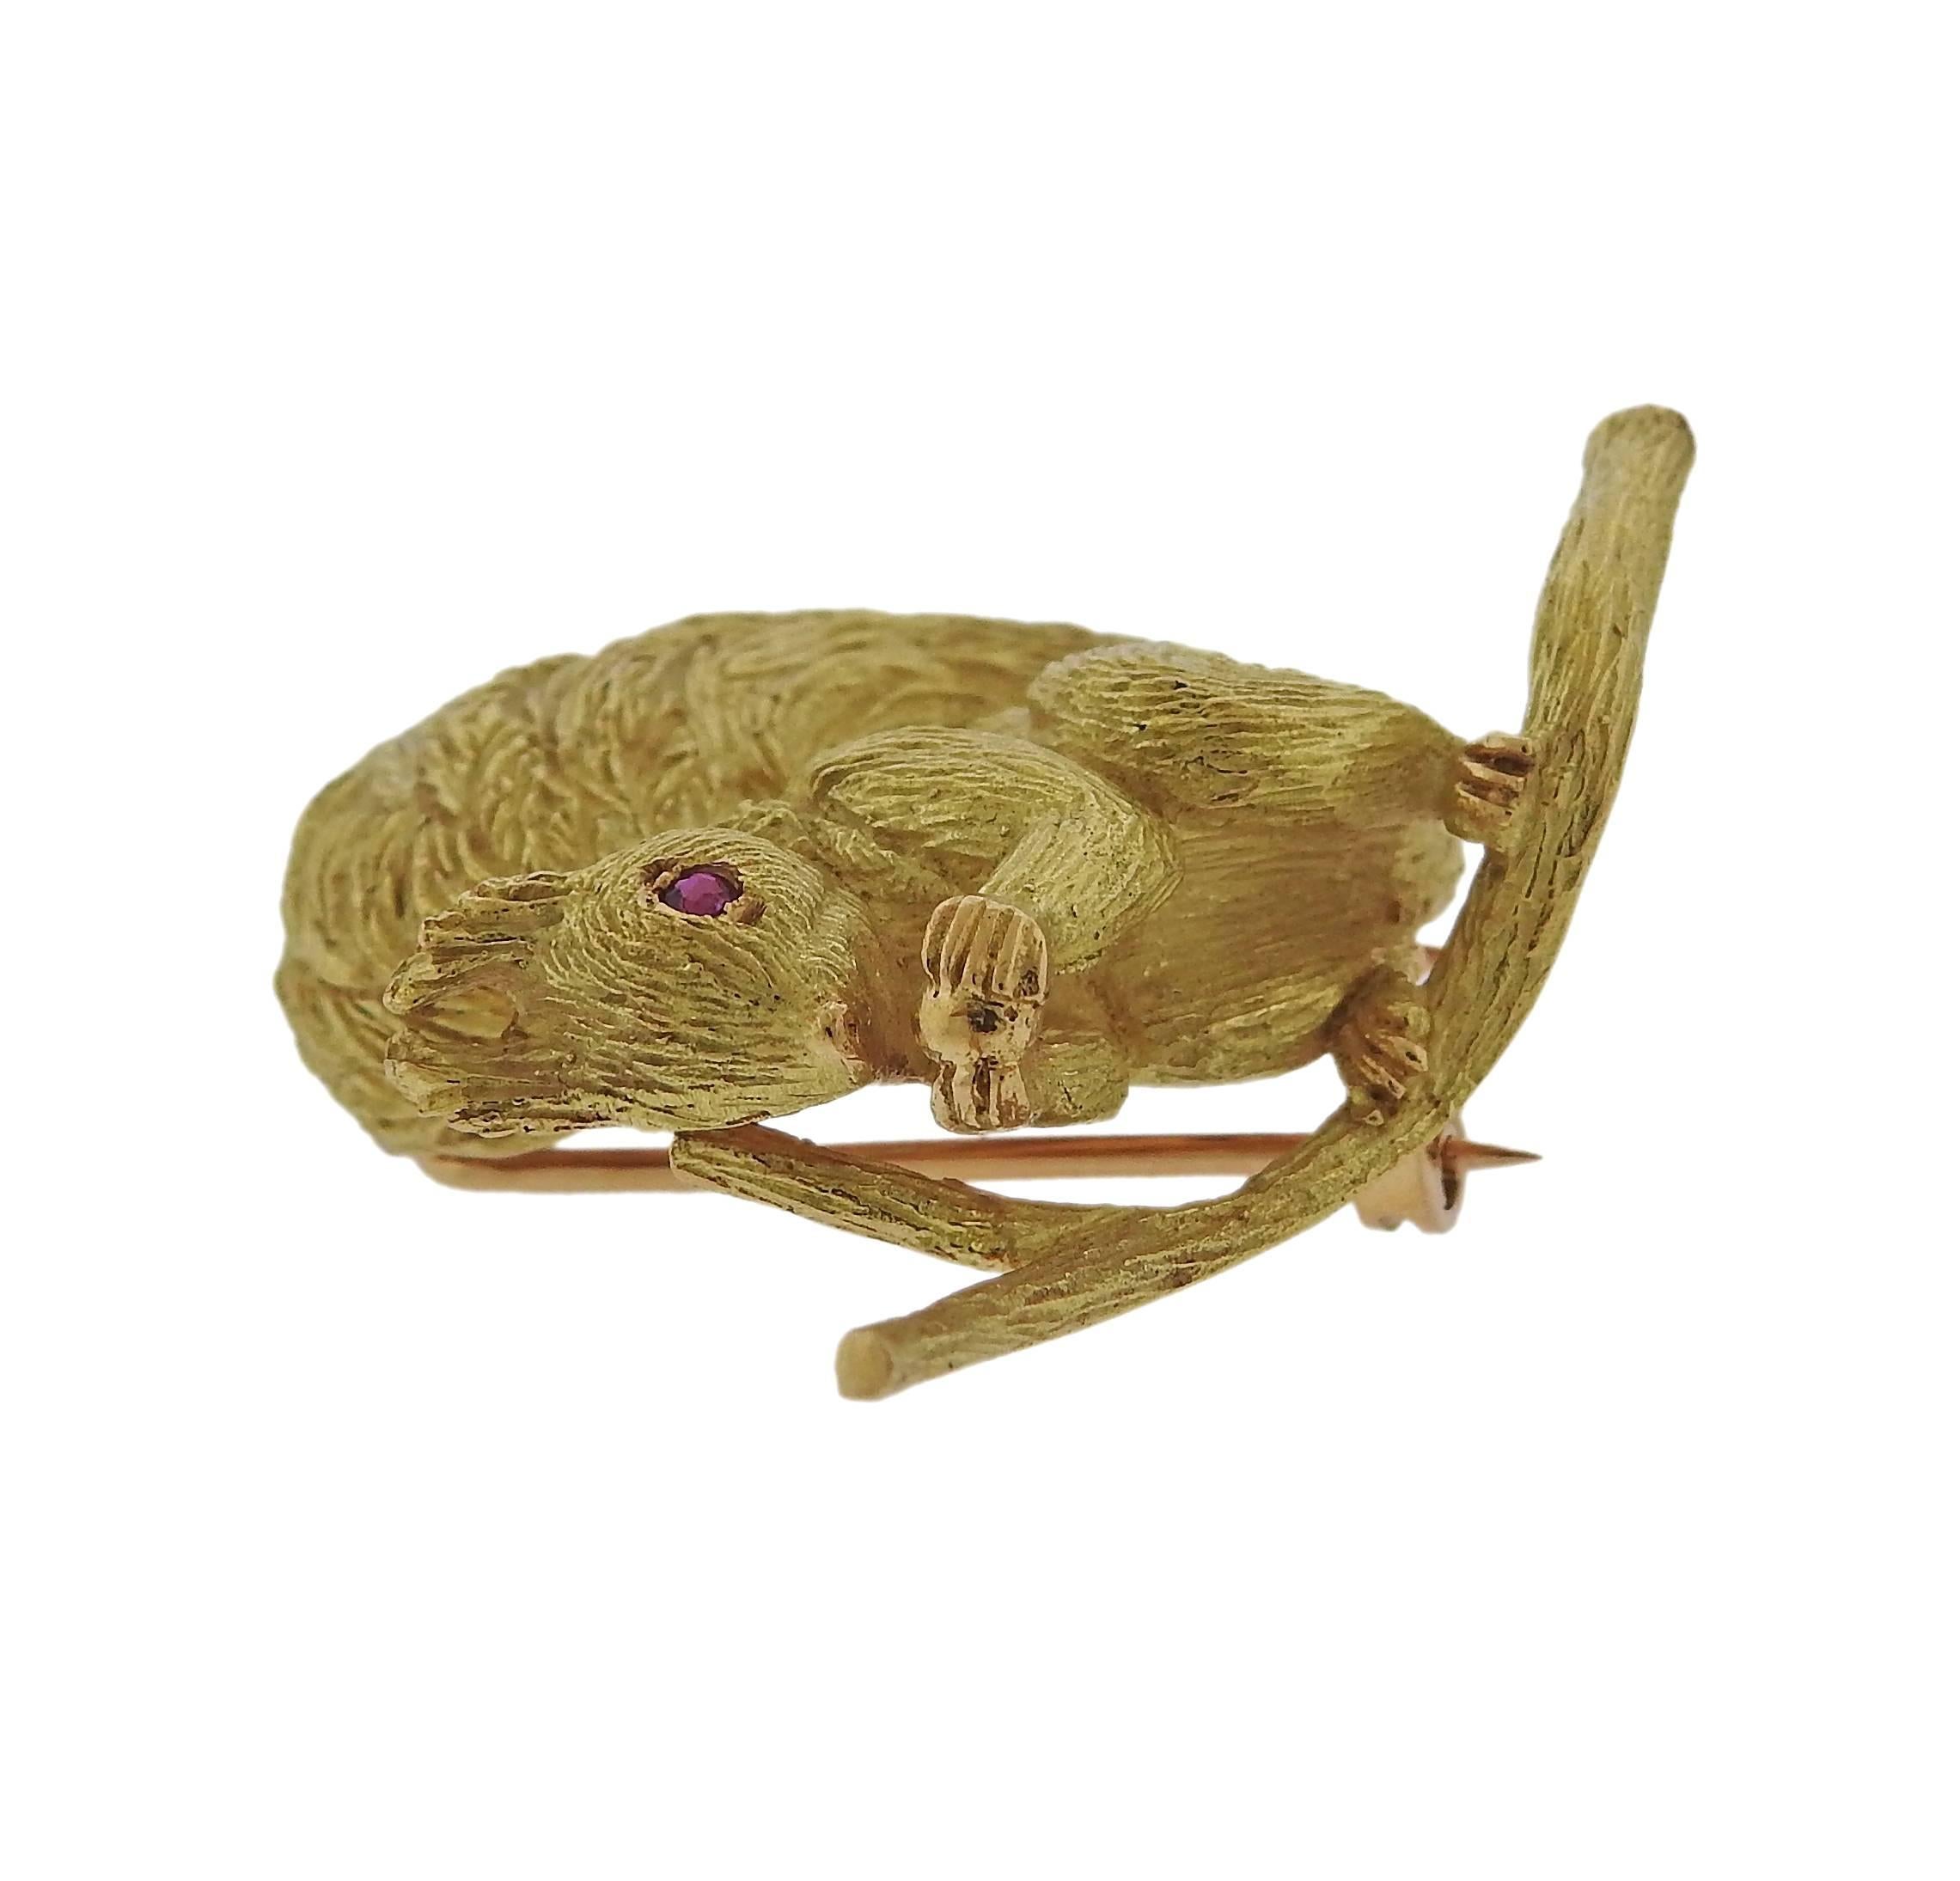 An 18k gold squirrel brooch pin featuring rubies crafted by Hermes. Brooch measures 38mm X 40mm. Marked Hermes Paris French Assay Mark. Weight is 16.4 grams. 